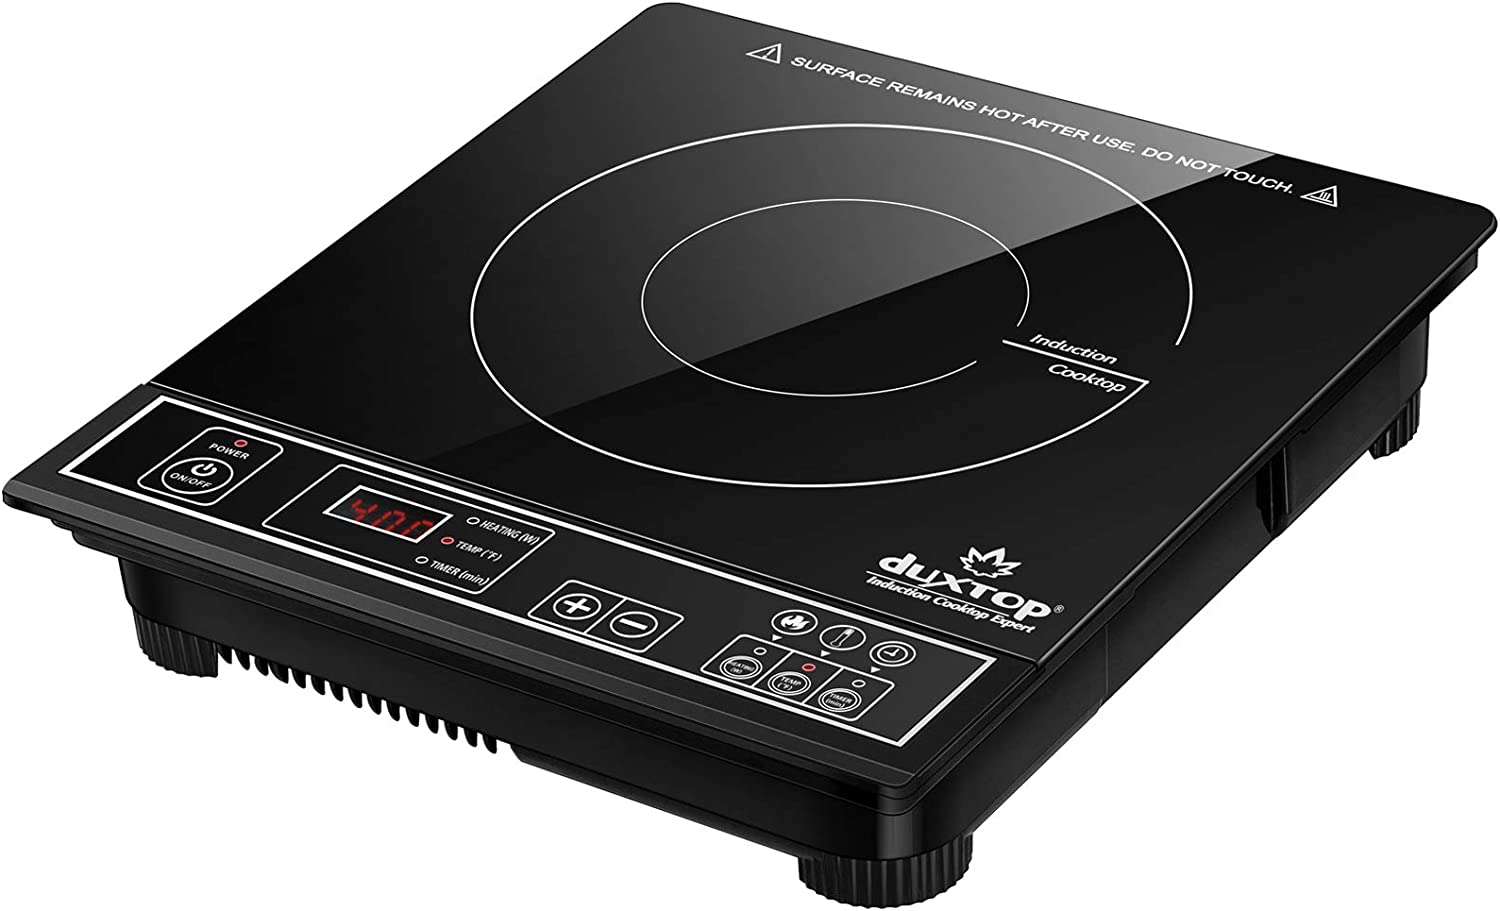 Duxtop 1800W Portable Induction Cooktop, Countertop Burner Included 5.7  Quarts Professional Stainless Steel Cooking Pot with Lid, Heavy  Impact-bonded